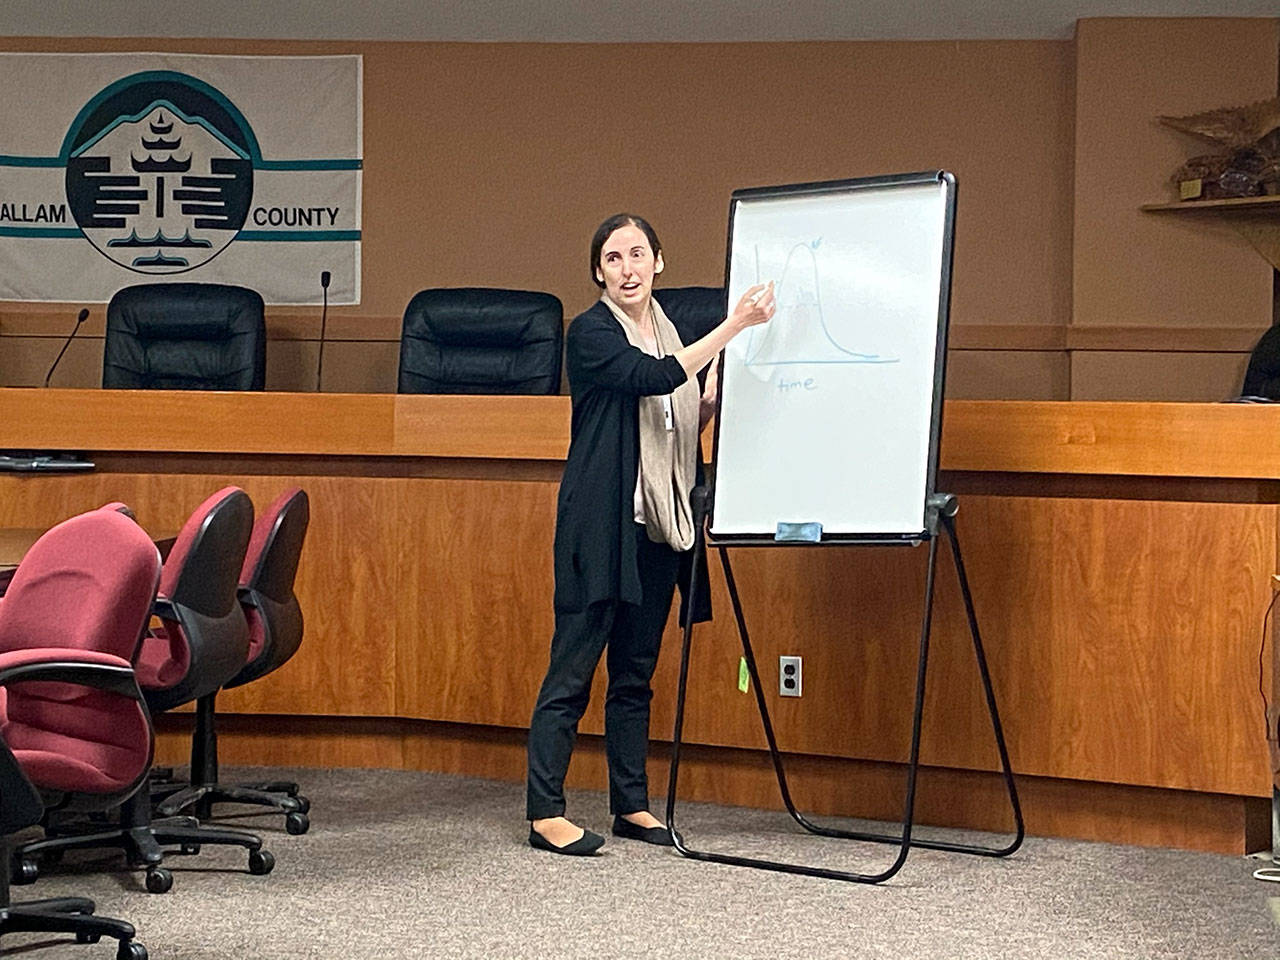 Dr. Allison Berry Unthank, Clallam County public health officer, displays an epidemic curve during a COVID-19 status briefing at the Clallam County Courthouse on Wednesday, March 11, 2020. (Rob Ollikainen/Peninsula Daily News)